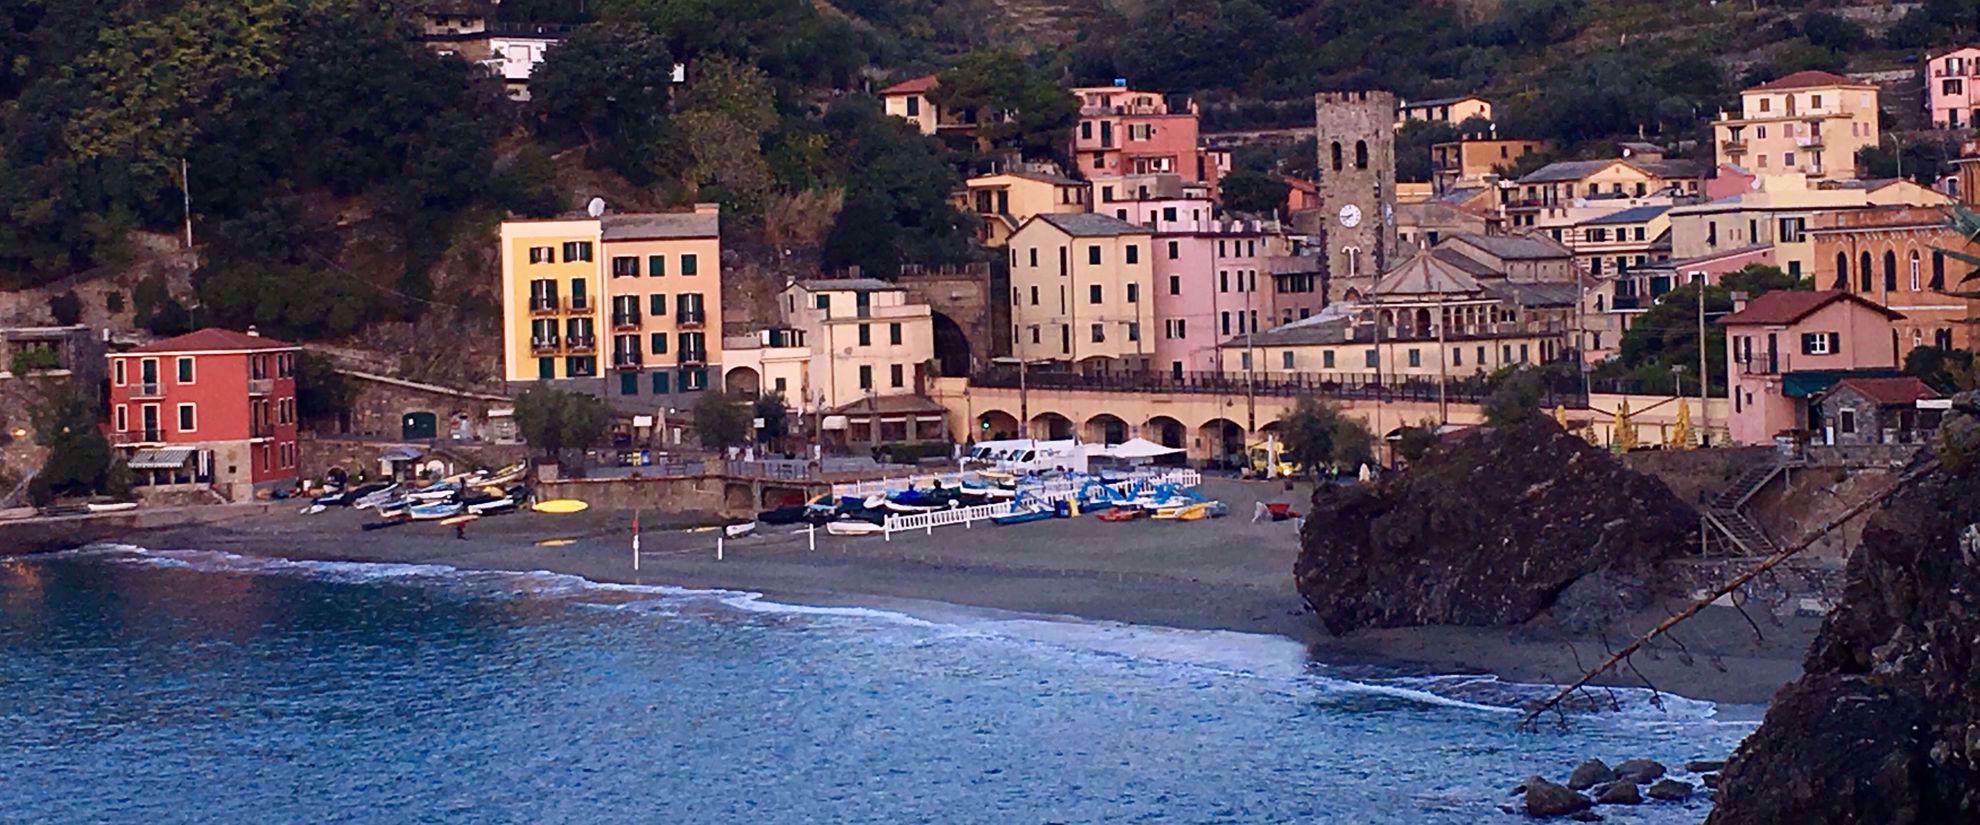 Beach in italy with colorful buildings